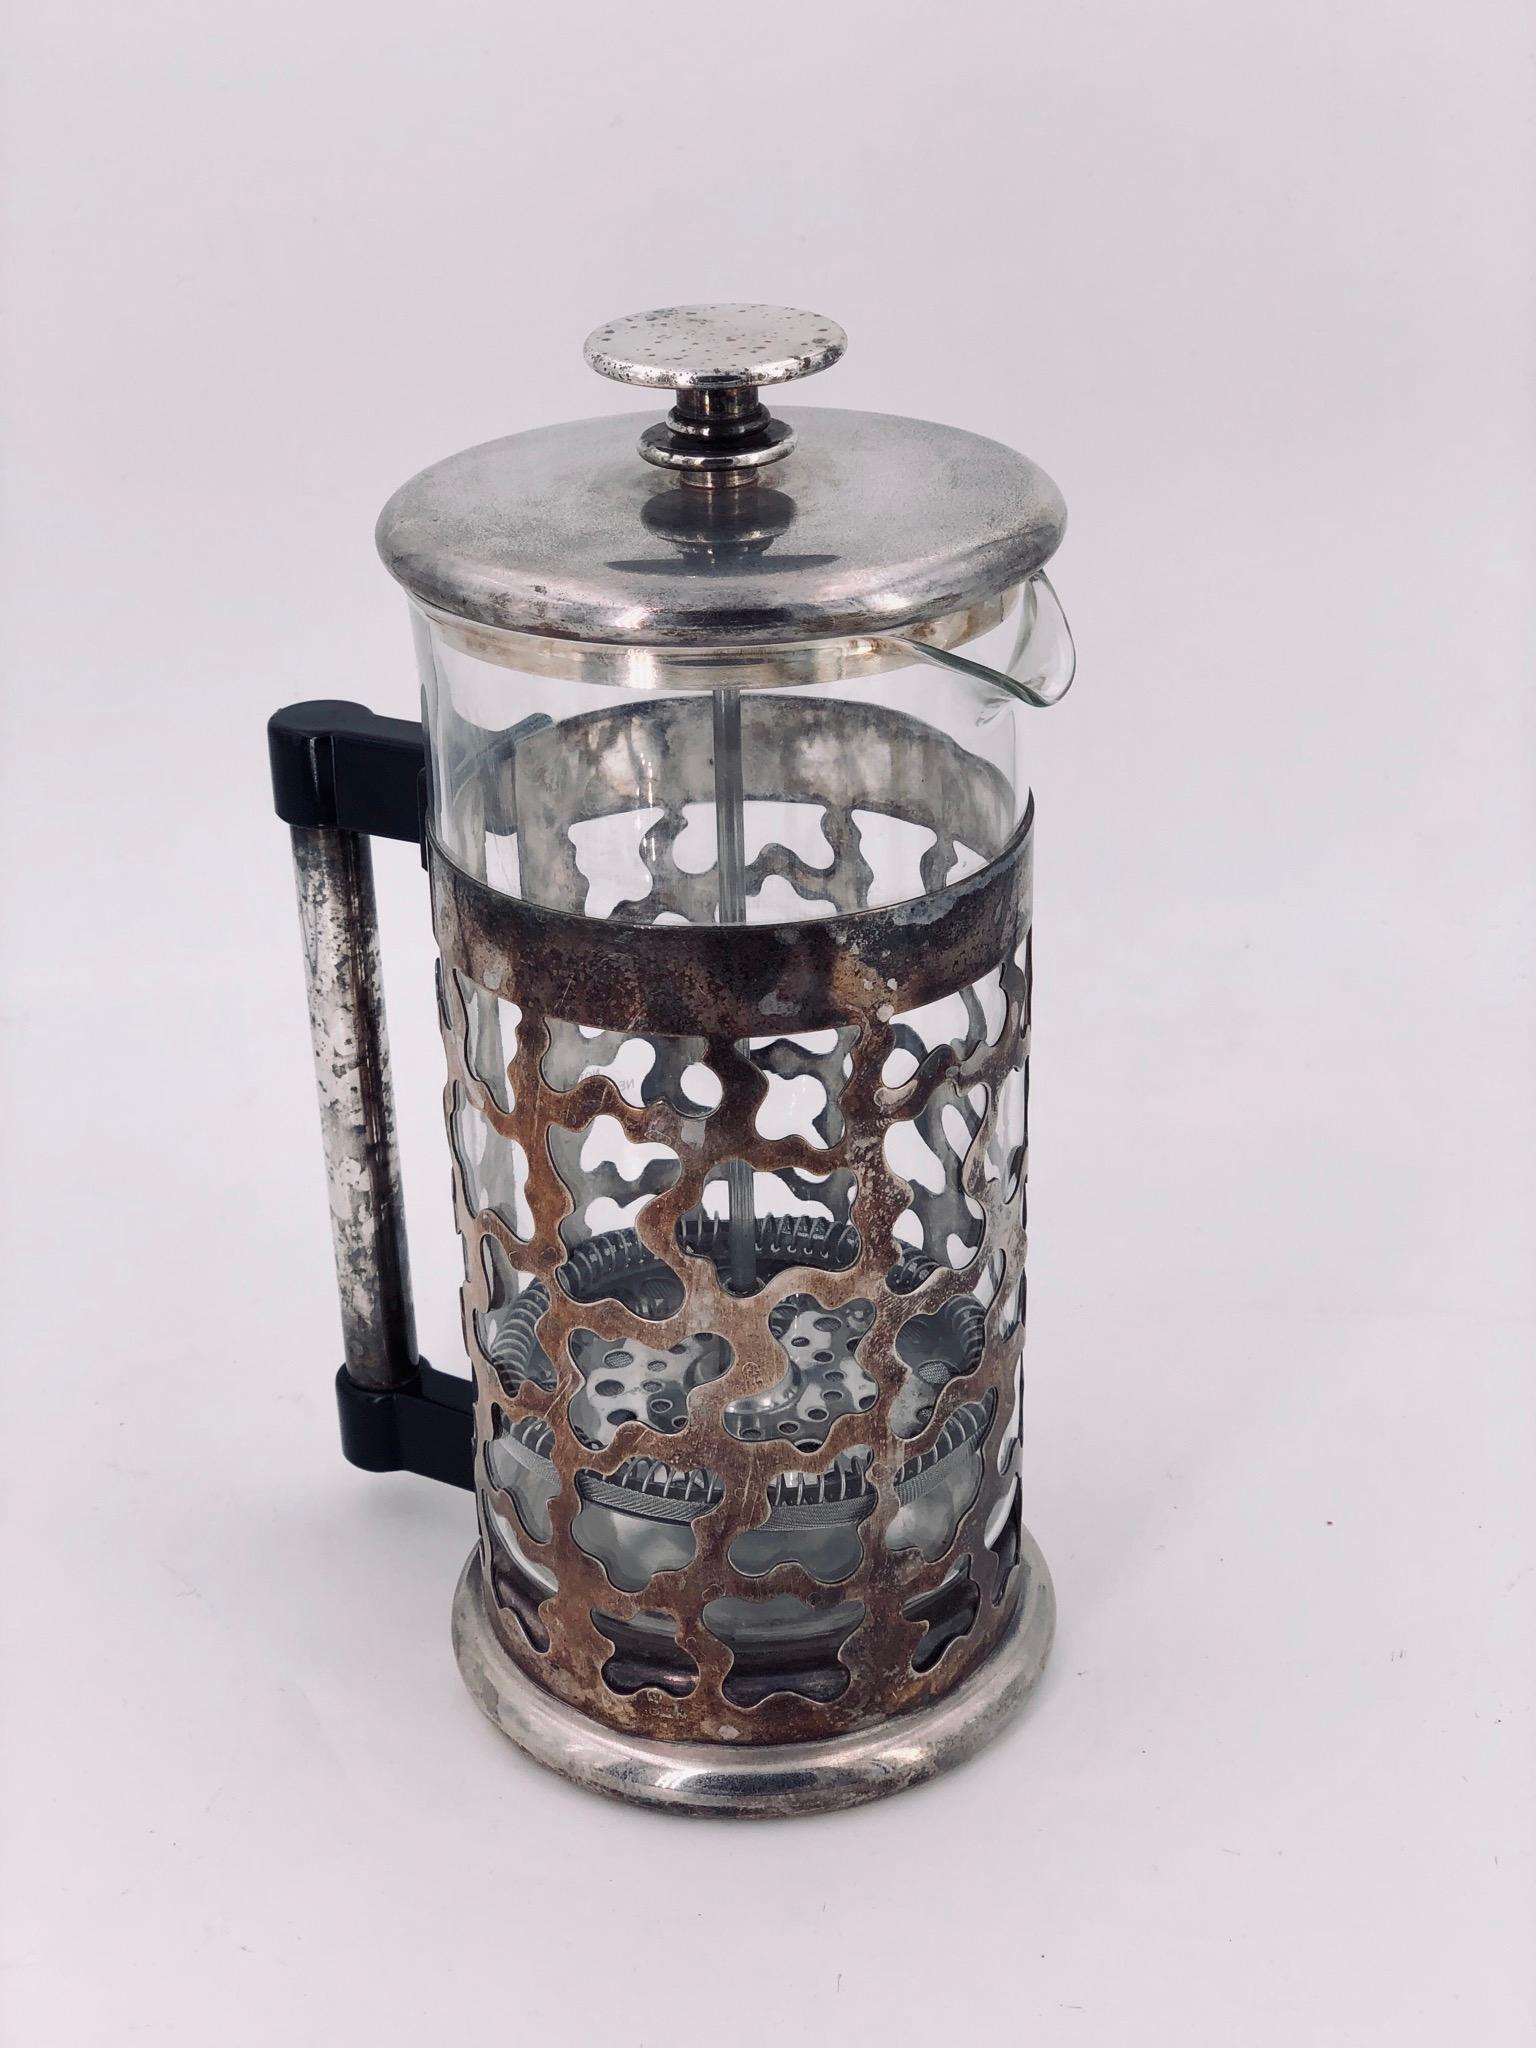 American Rare French Press Coffee Maker Set Designed in 1987 by George Sowden Memphis Era